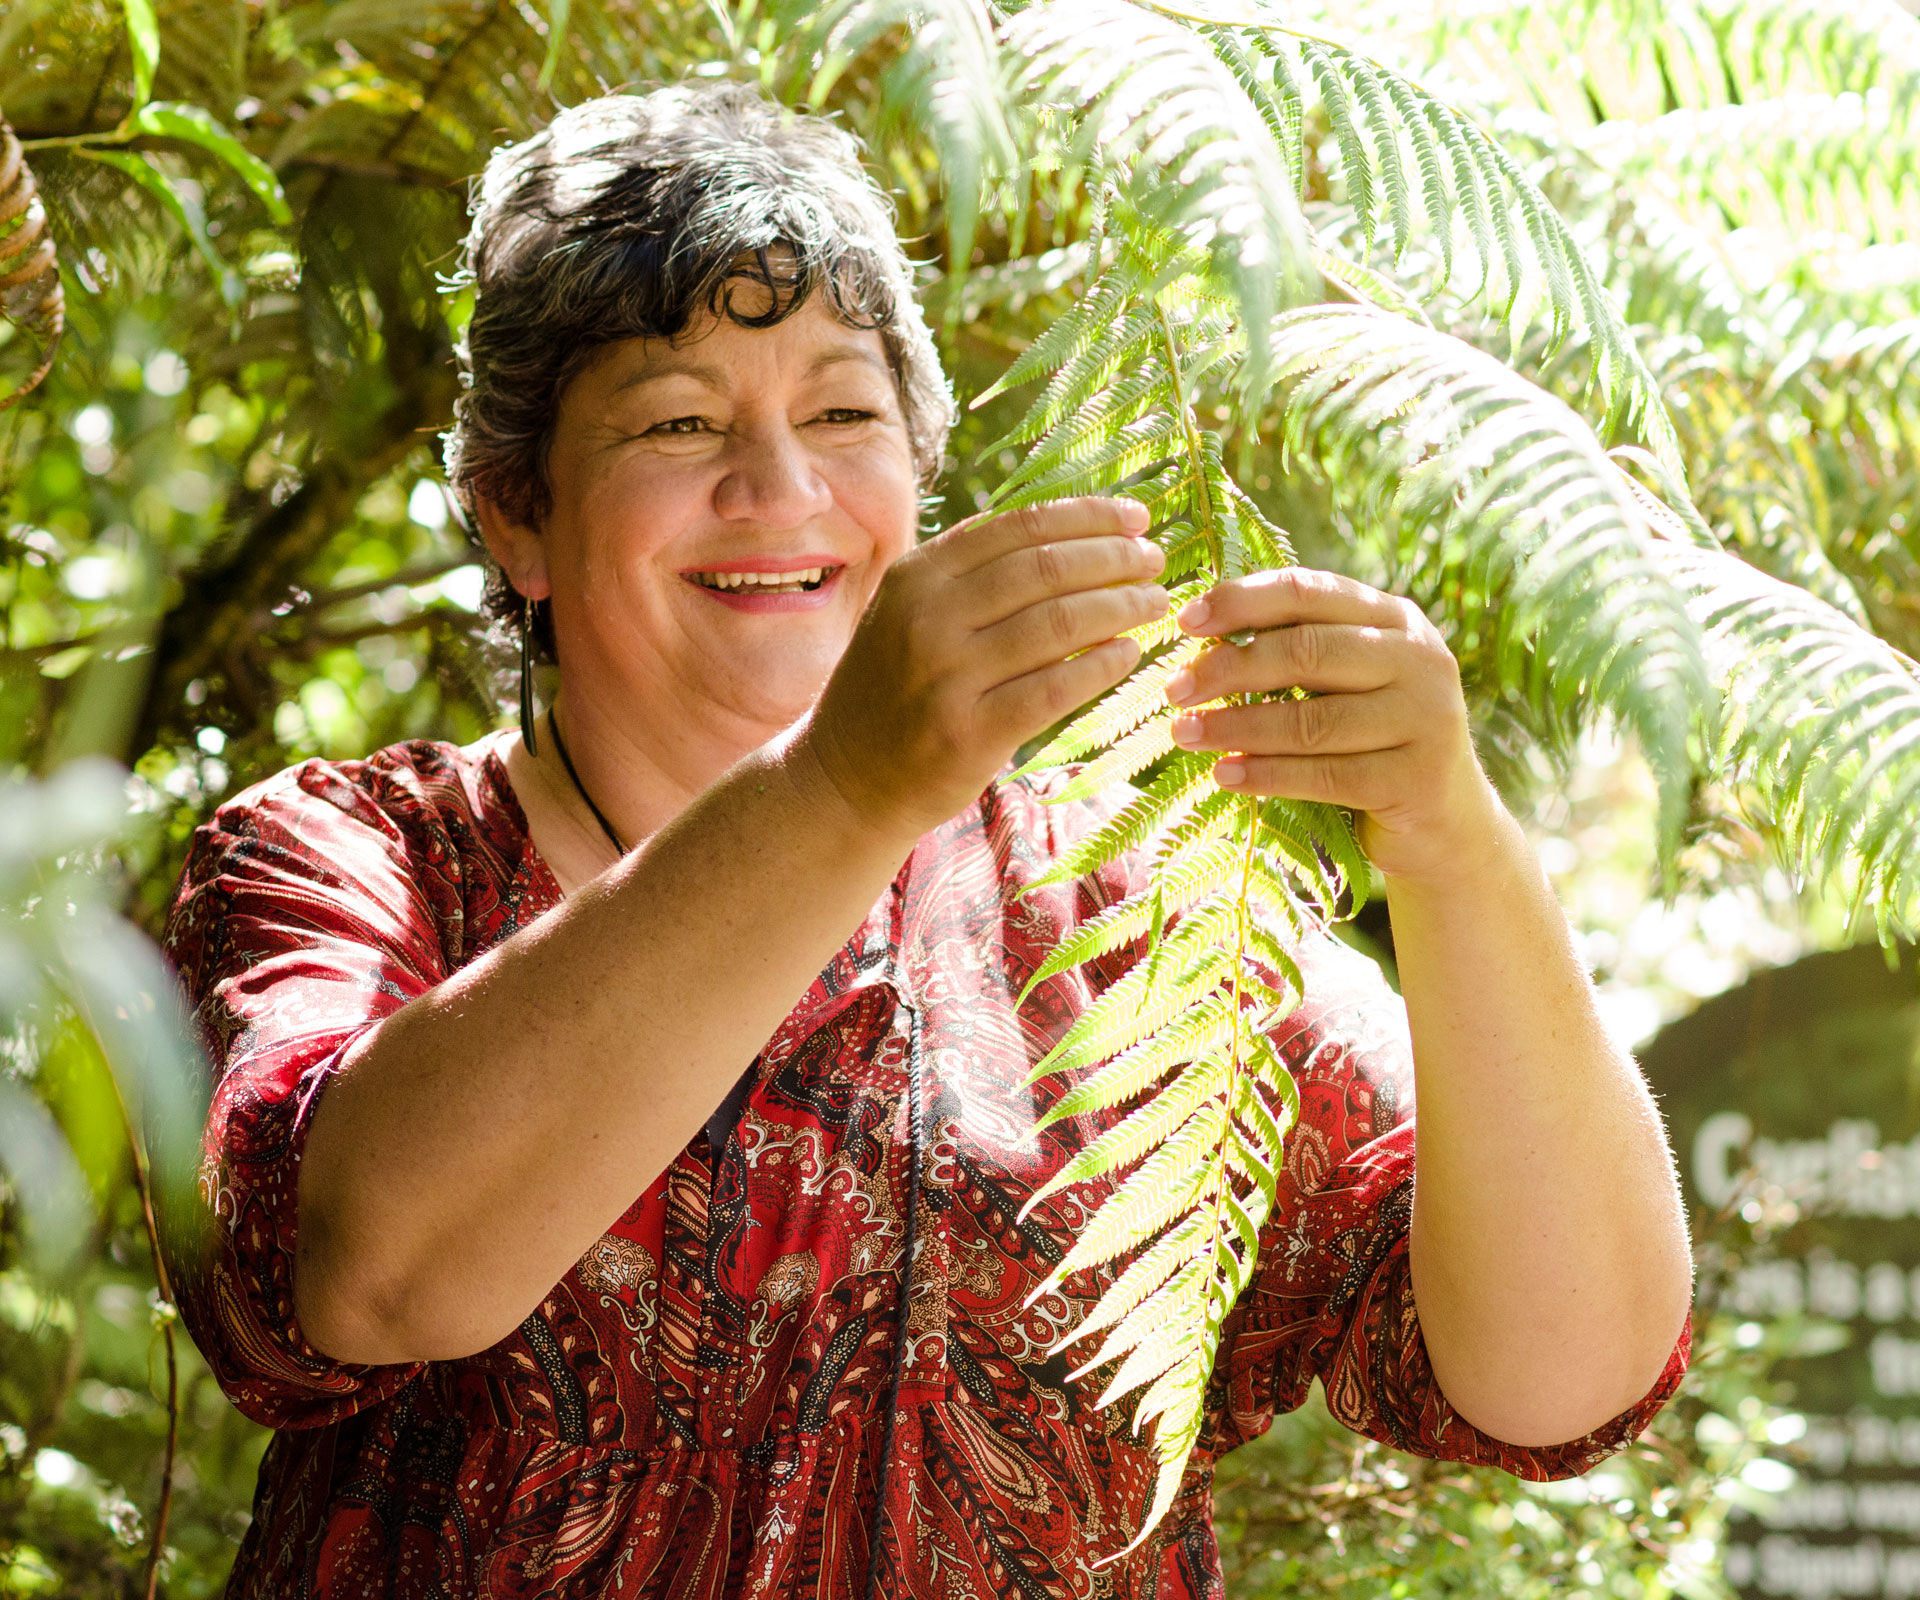 The workaholic who became a Maori healer